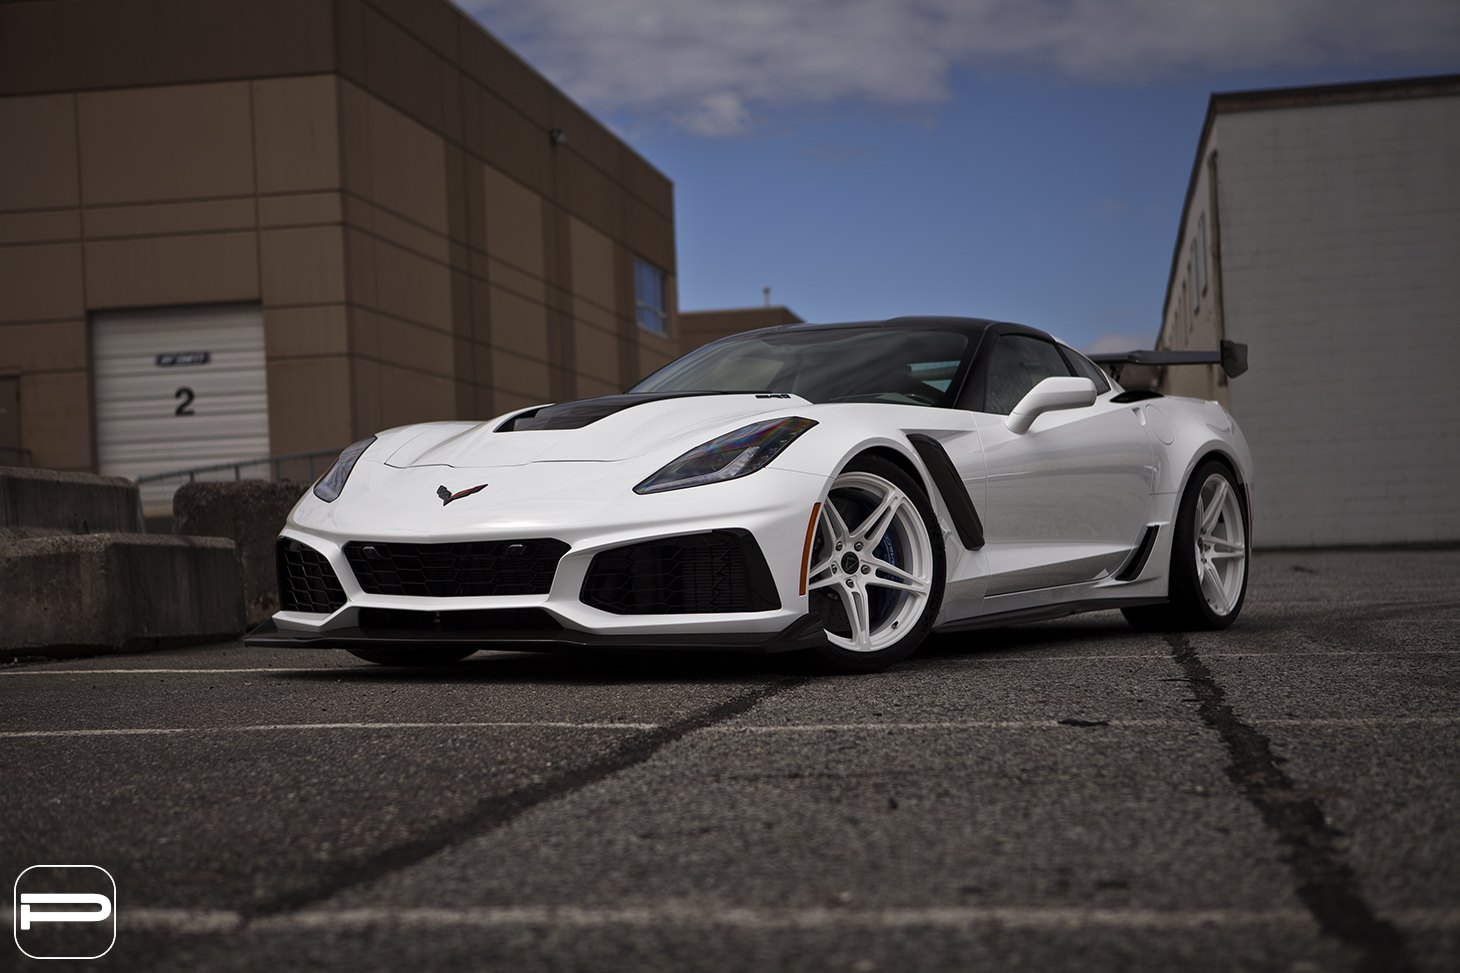 Dark Smome LED Headlights on White Chevy Corvette - Photo by PUR Wheels